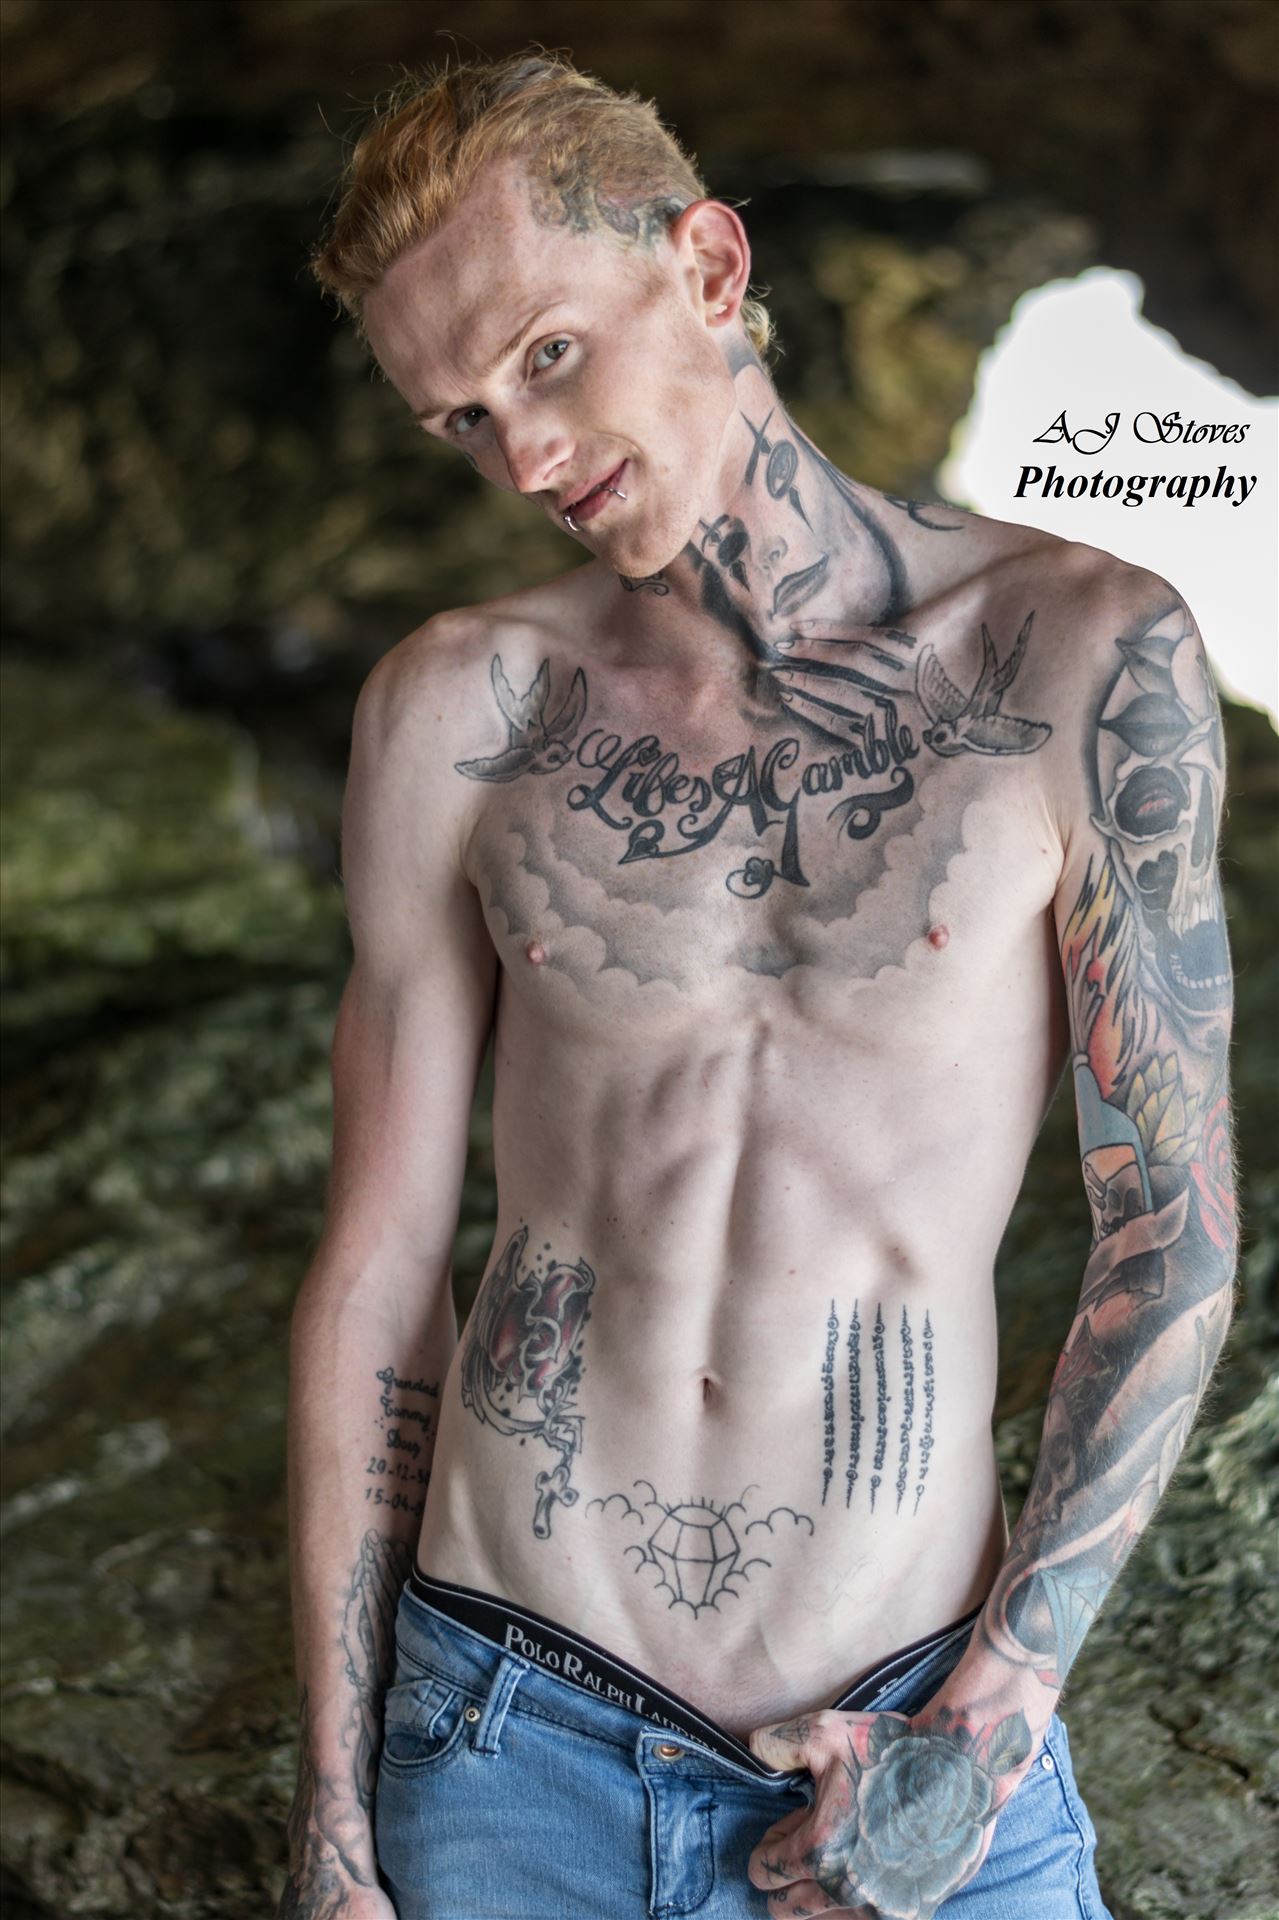 Luke Proctor 12 - Great shoot with Luke down Seaham Beach by AJ Stoves Photography